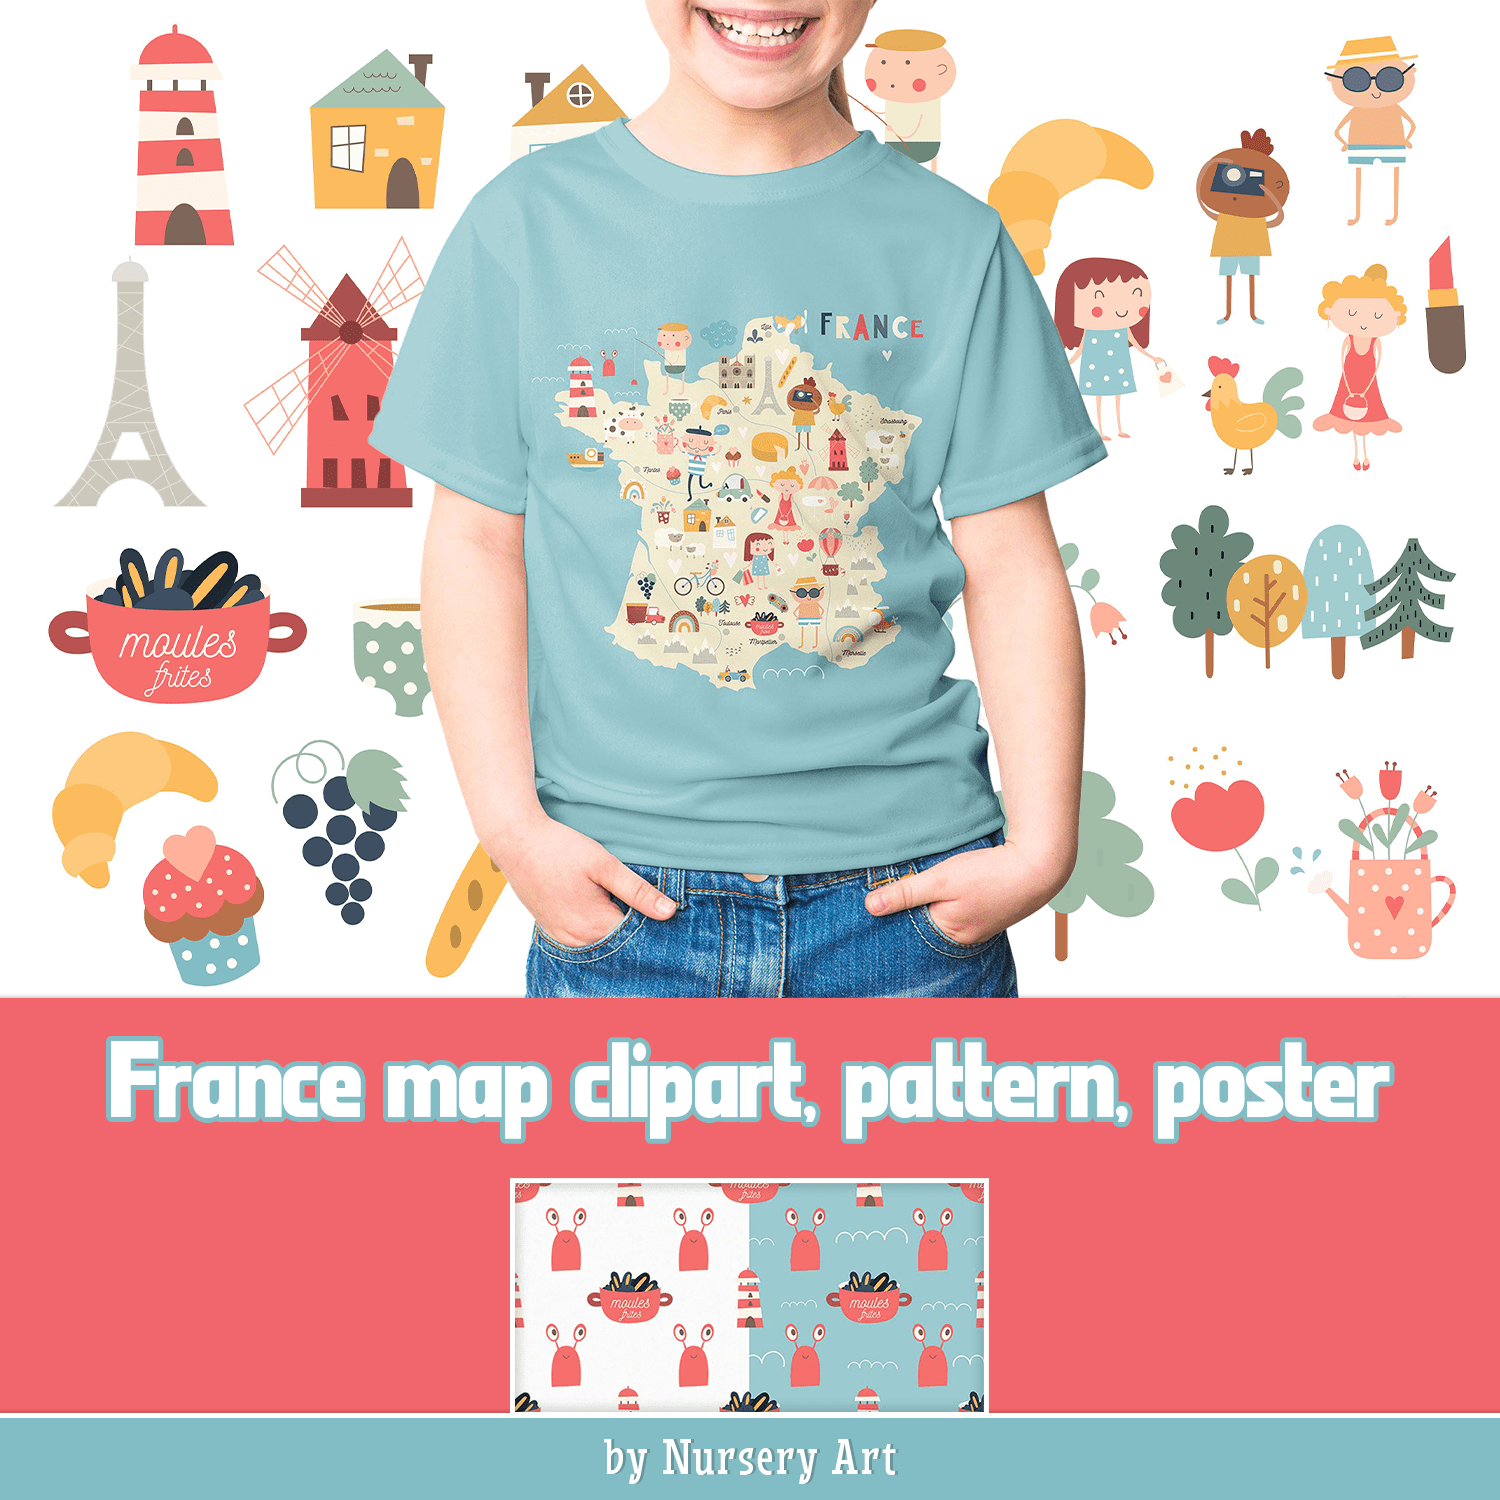 France map, clipart, pattern, poster cover.